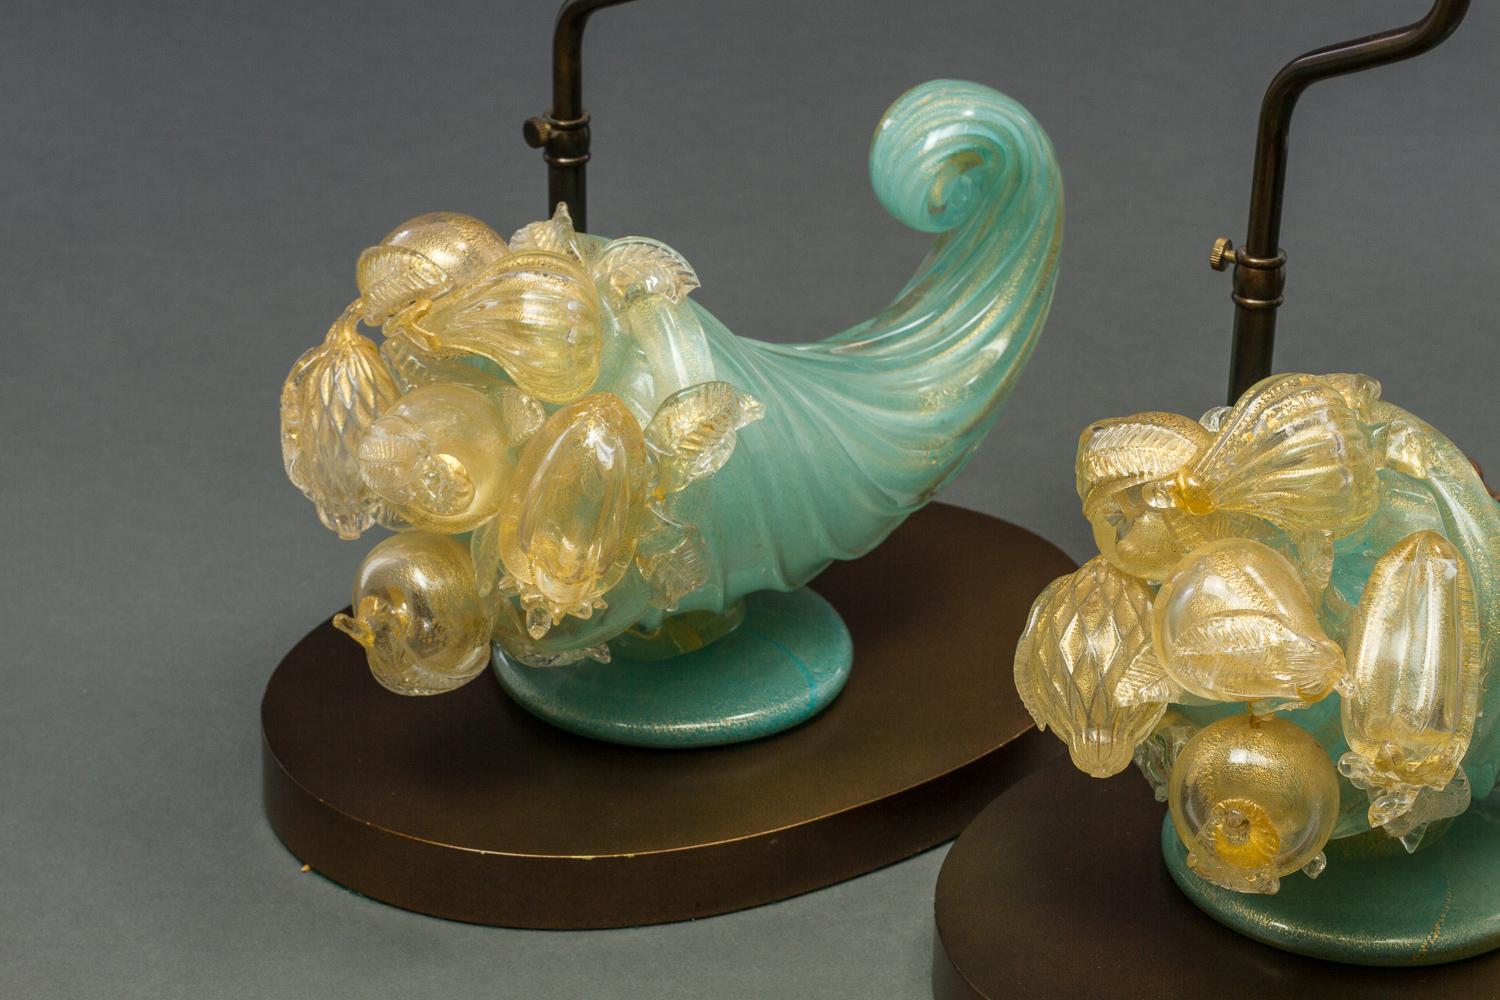 Pair of Venetian glass lamps made from sculptures and finials.